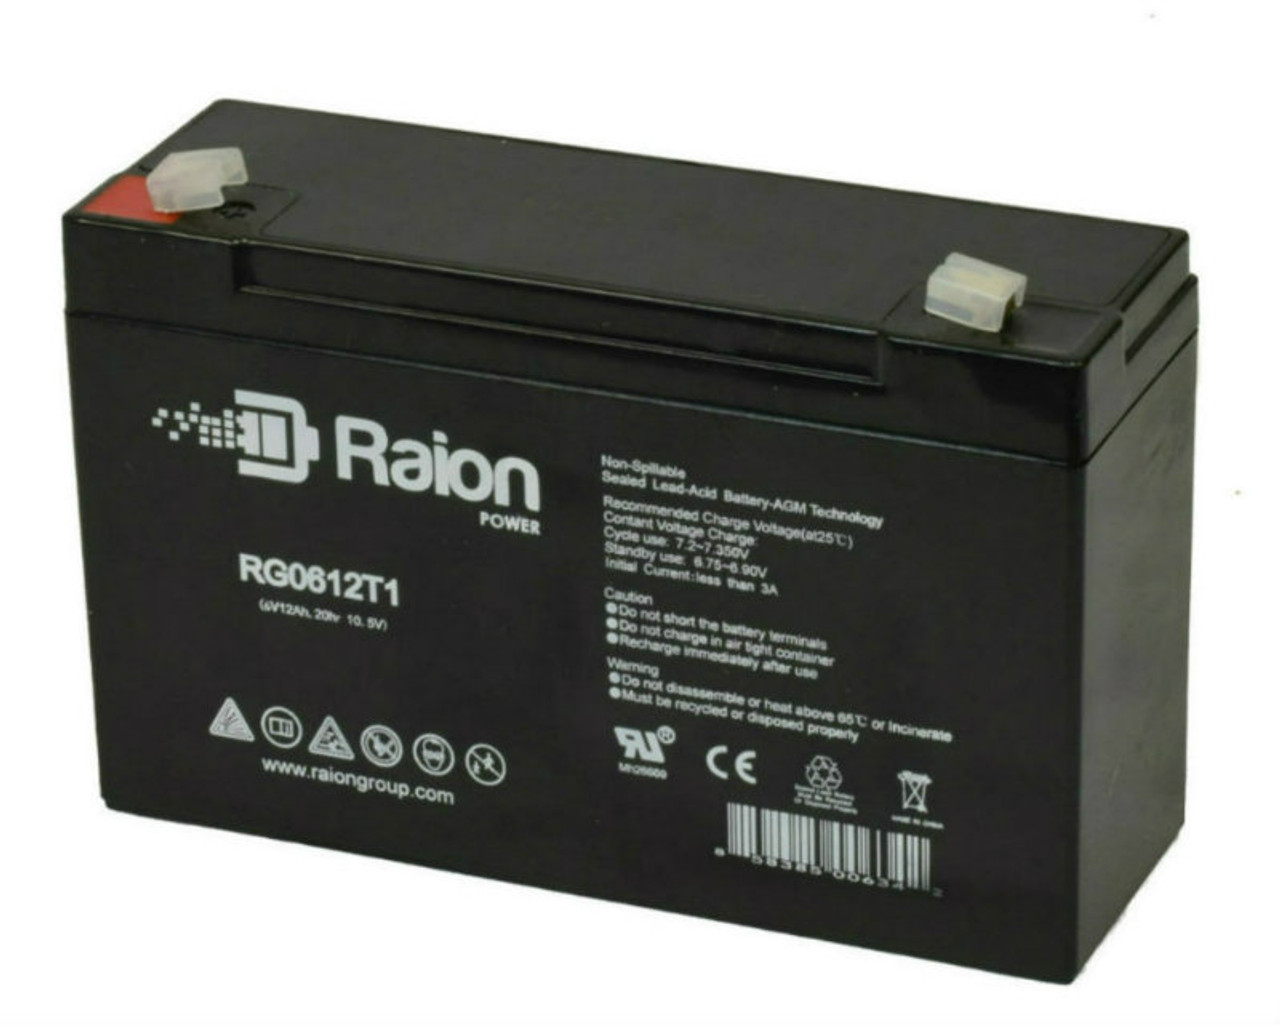 Raion Power RG06120T1 Replacement Battery for National Battery C18A